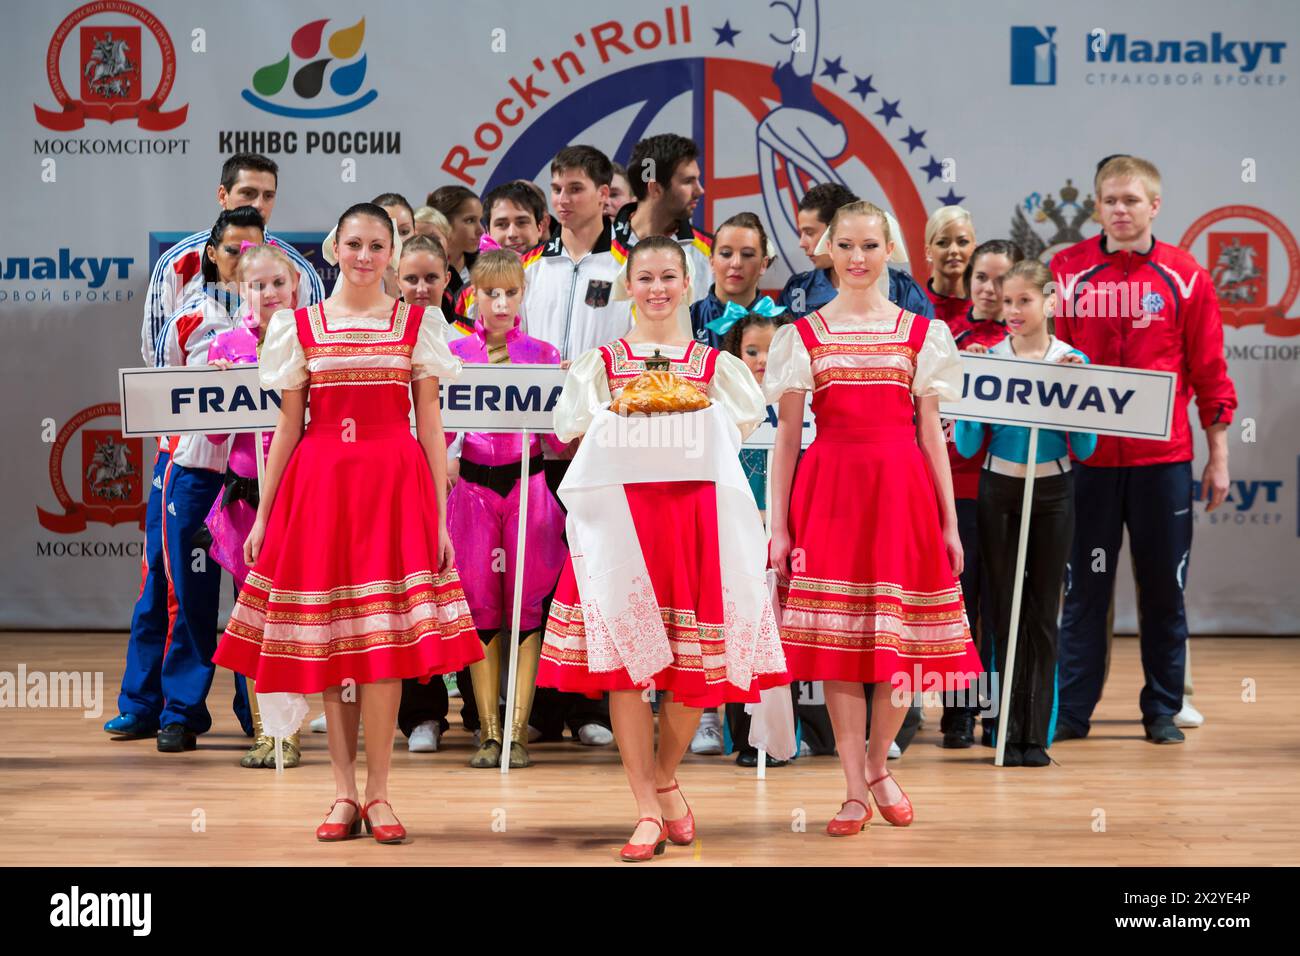 MOSCOW - OCT 27: Welcoming the participants of World championship on Acrobatic Rock n roll and the World Masters boogie-woogie at Universal sports and Stock Photo